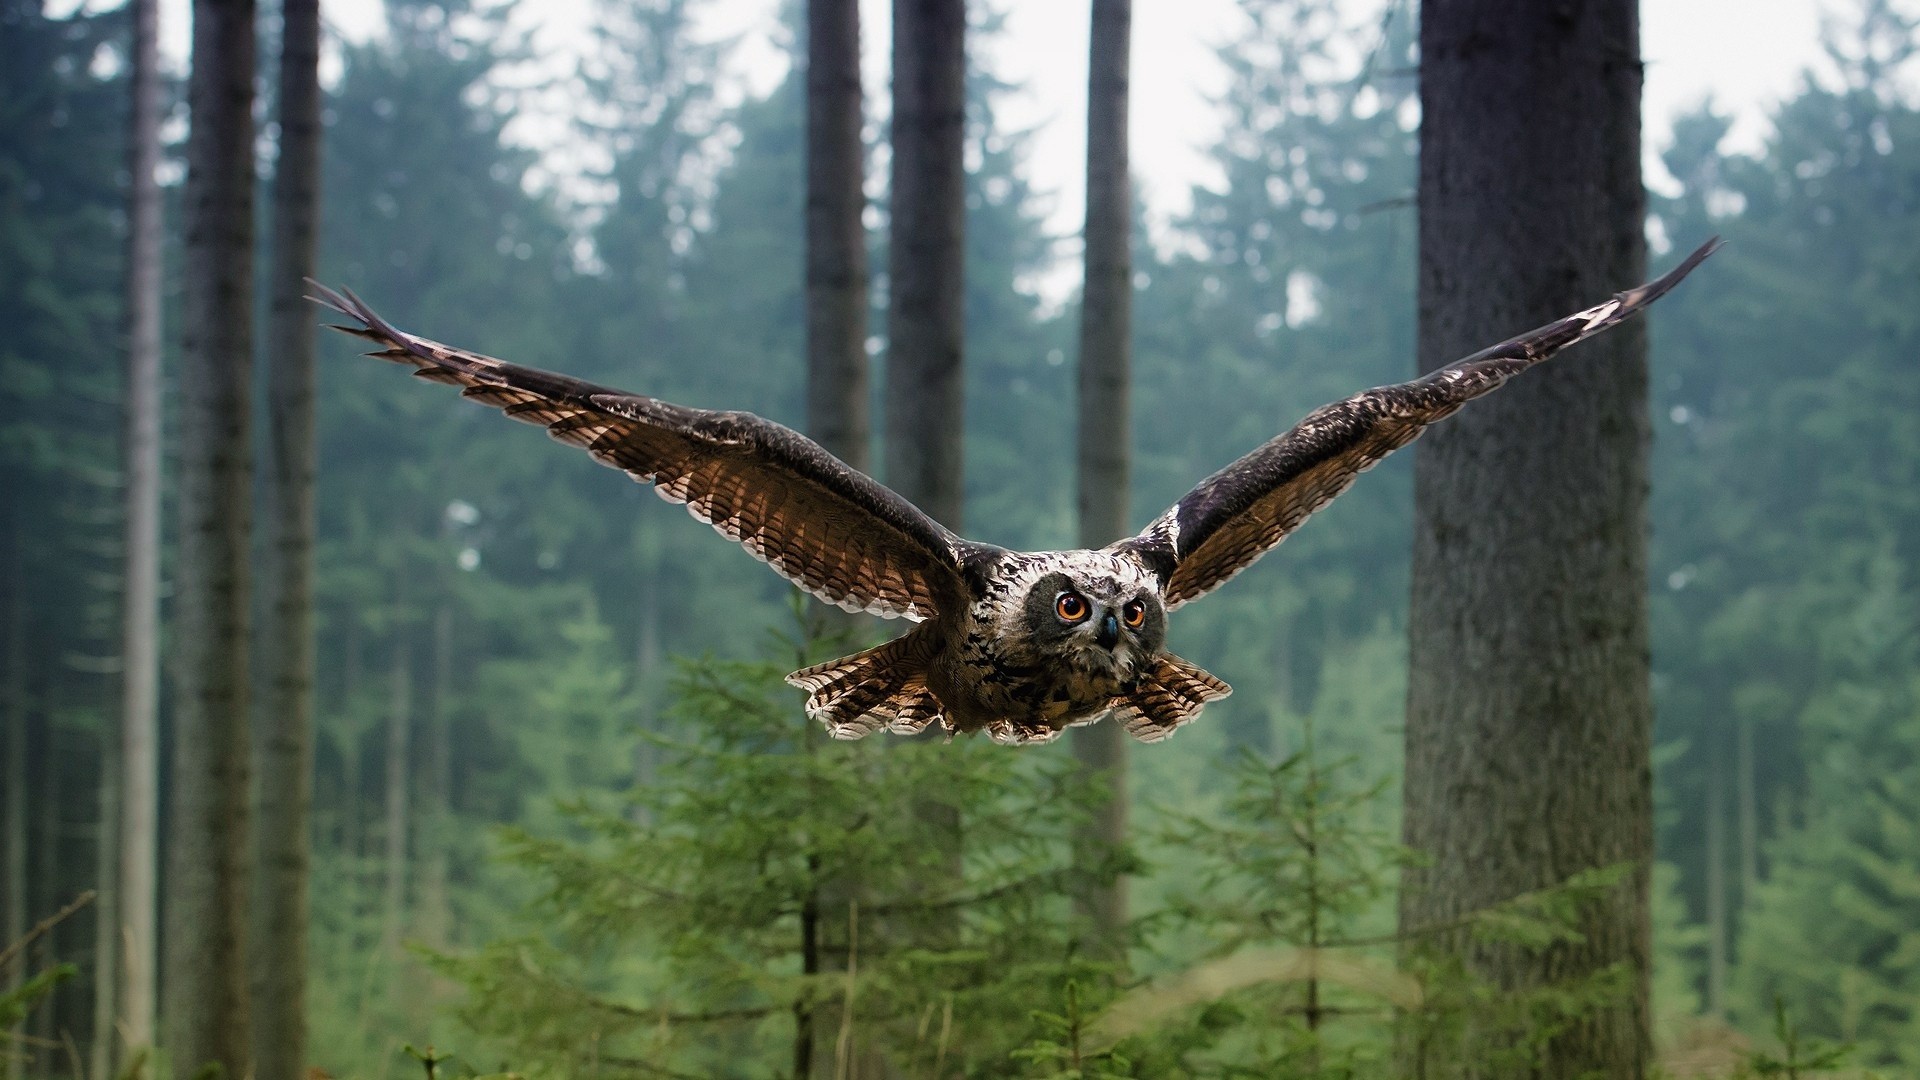 General 1920x1080 owl animals birds trees nature wings outdoors